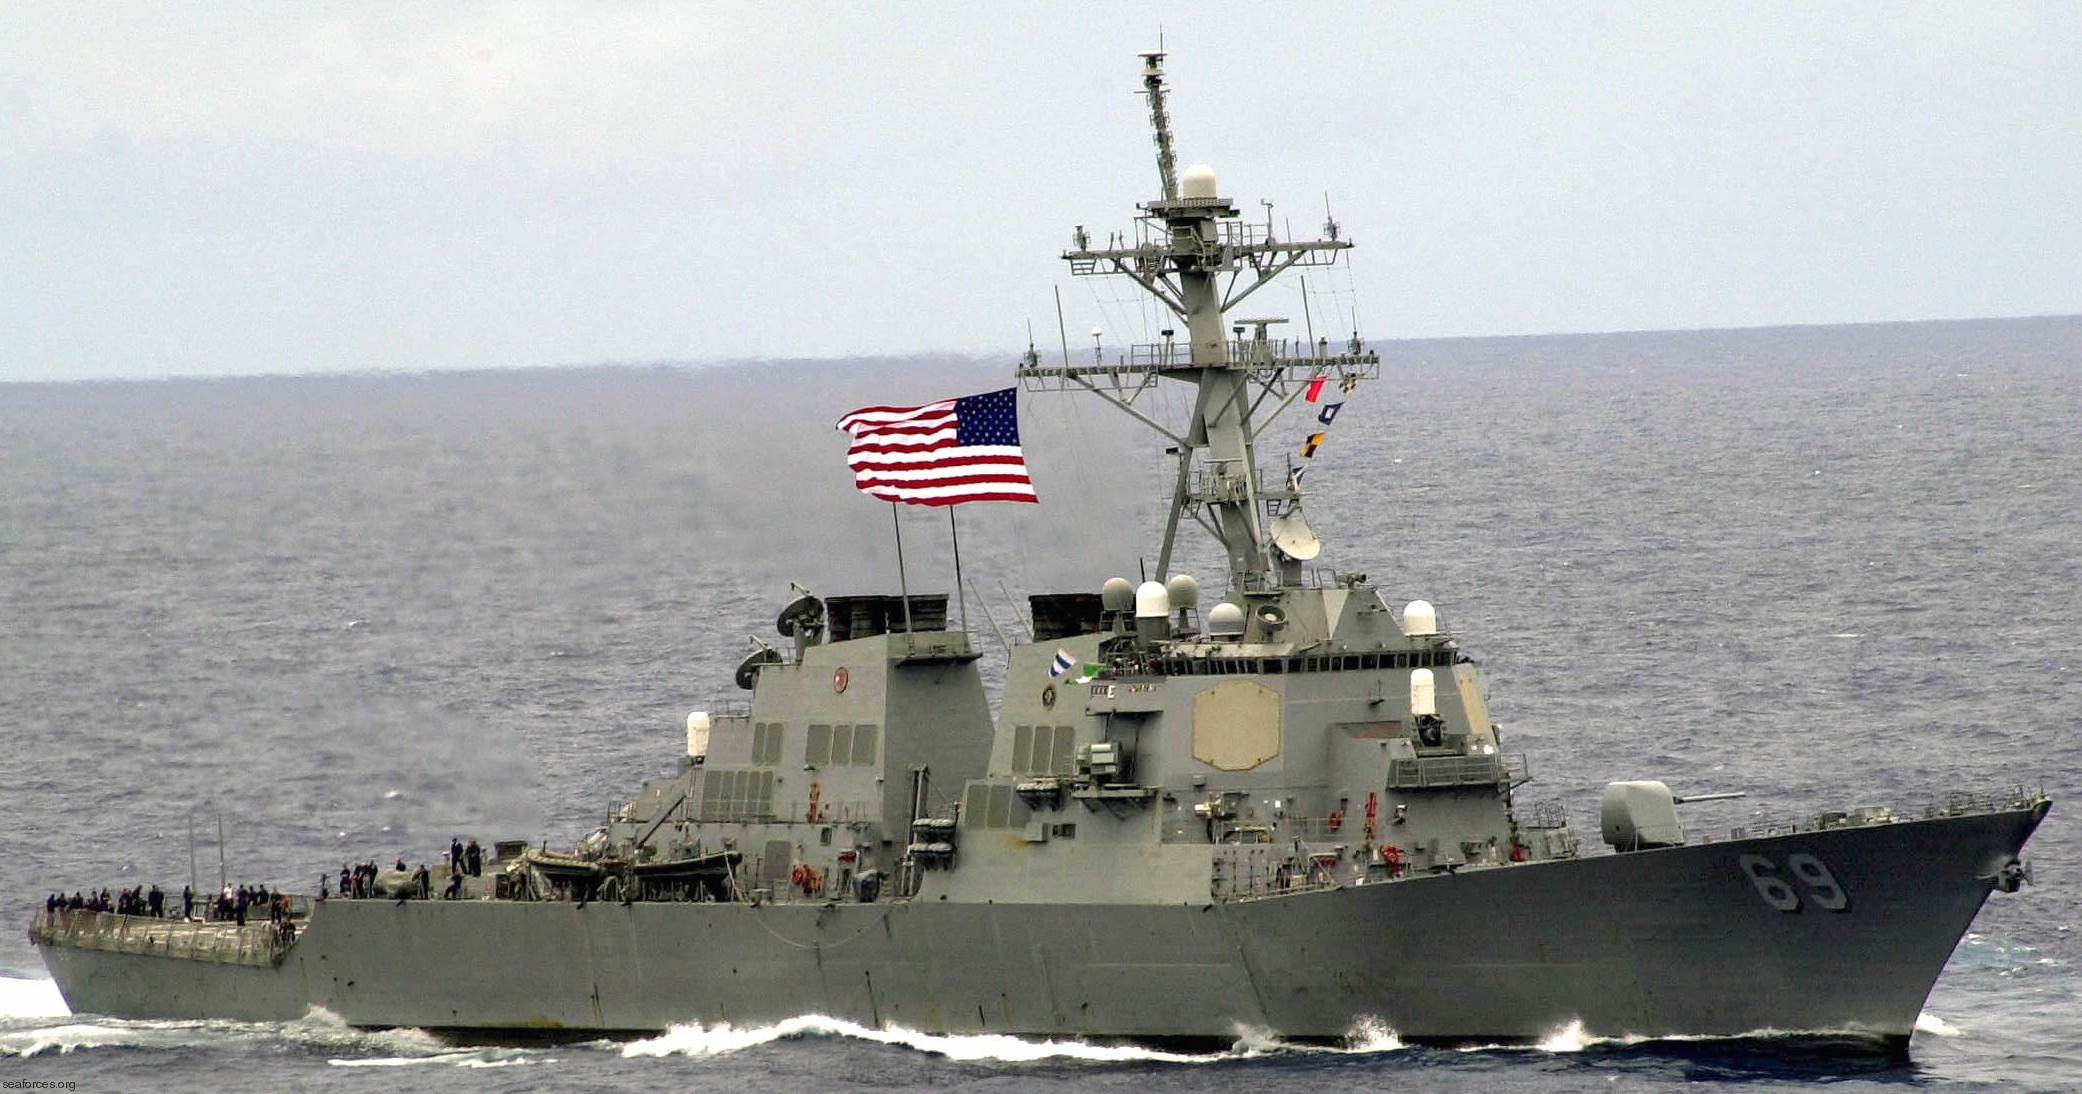 ddg-69 uss milius guided missile destroyer arleigh burke class aegis bmd 37